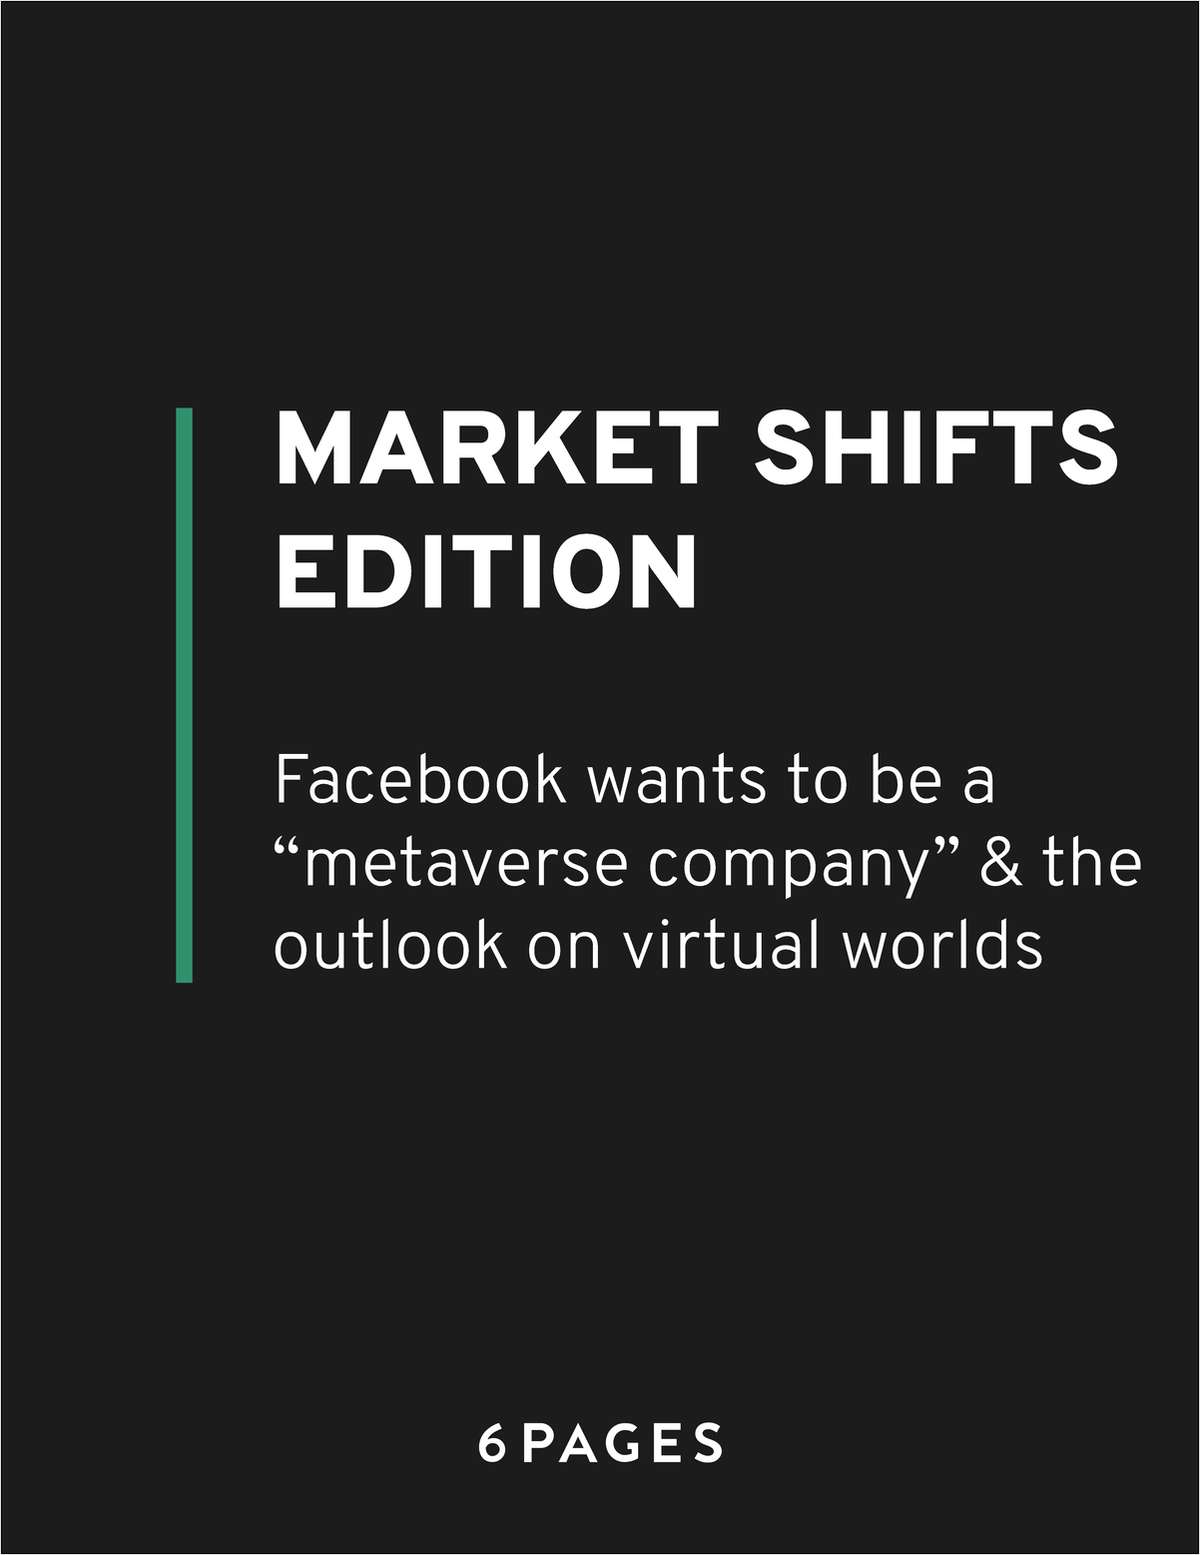 Market Shifts Edition: Facebook wants to be a metaverse company & the outlook on virtual worlds